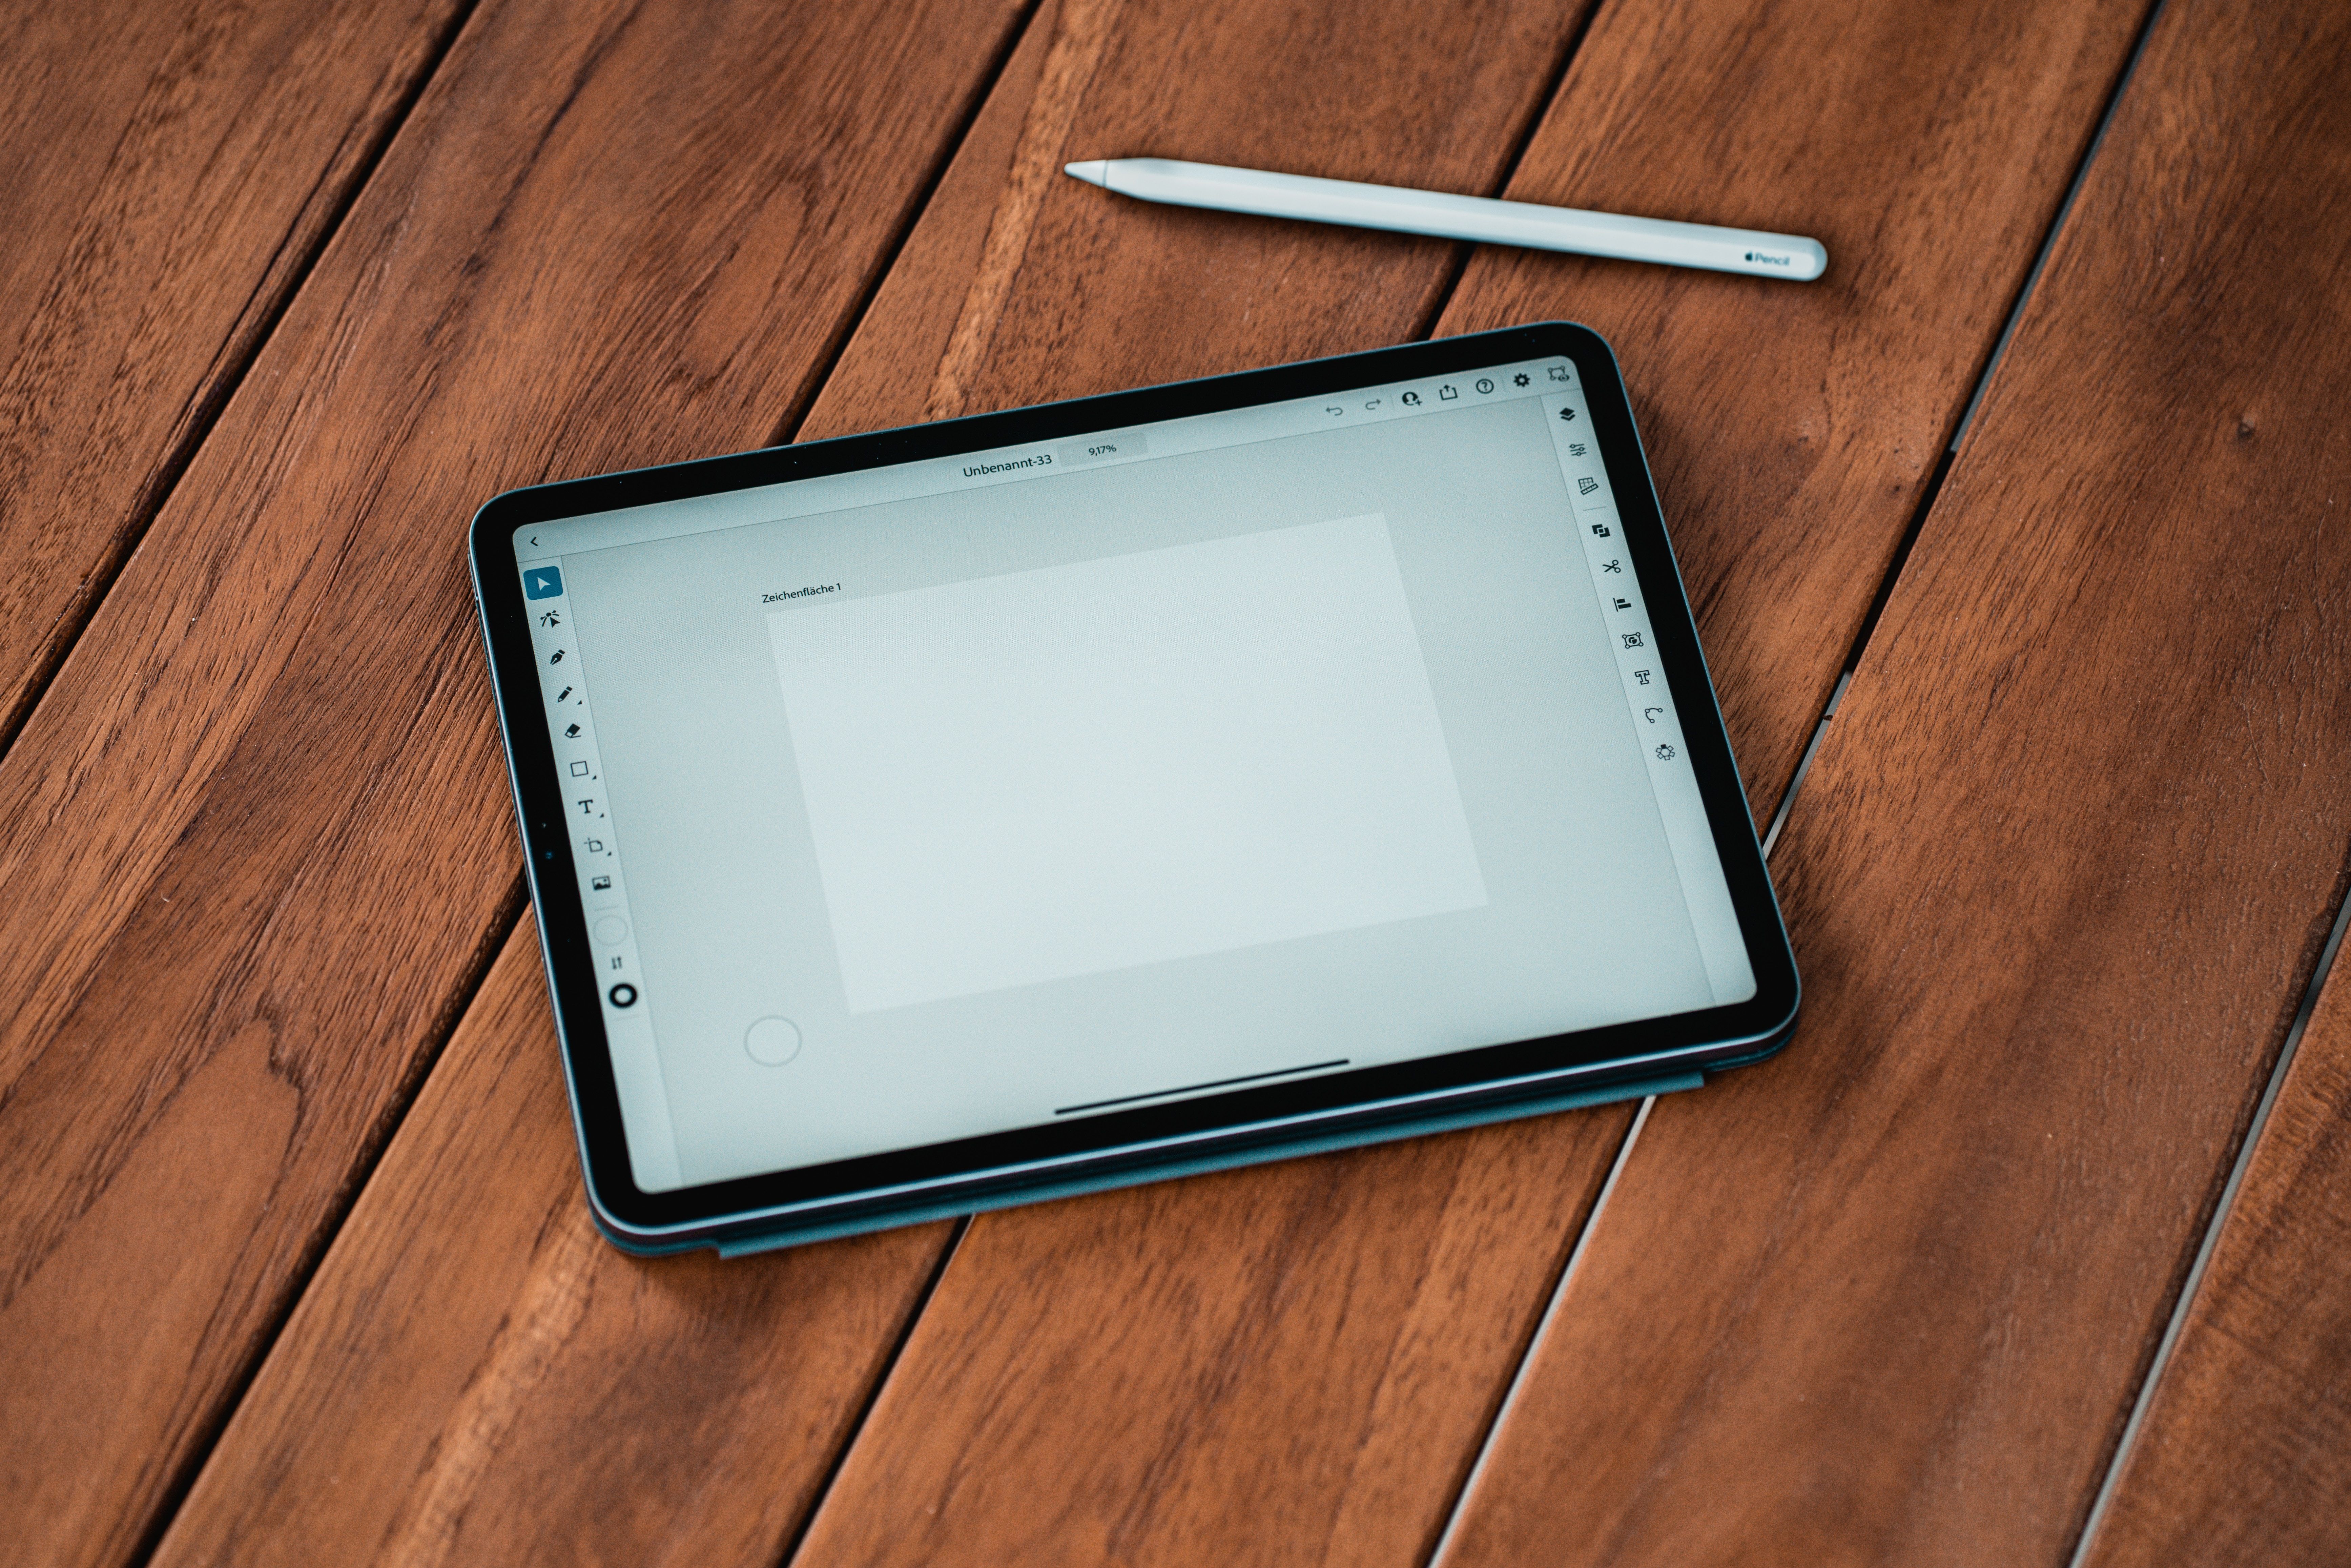 Tablet on table with stylus